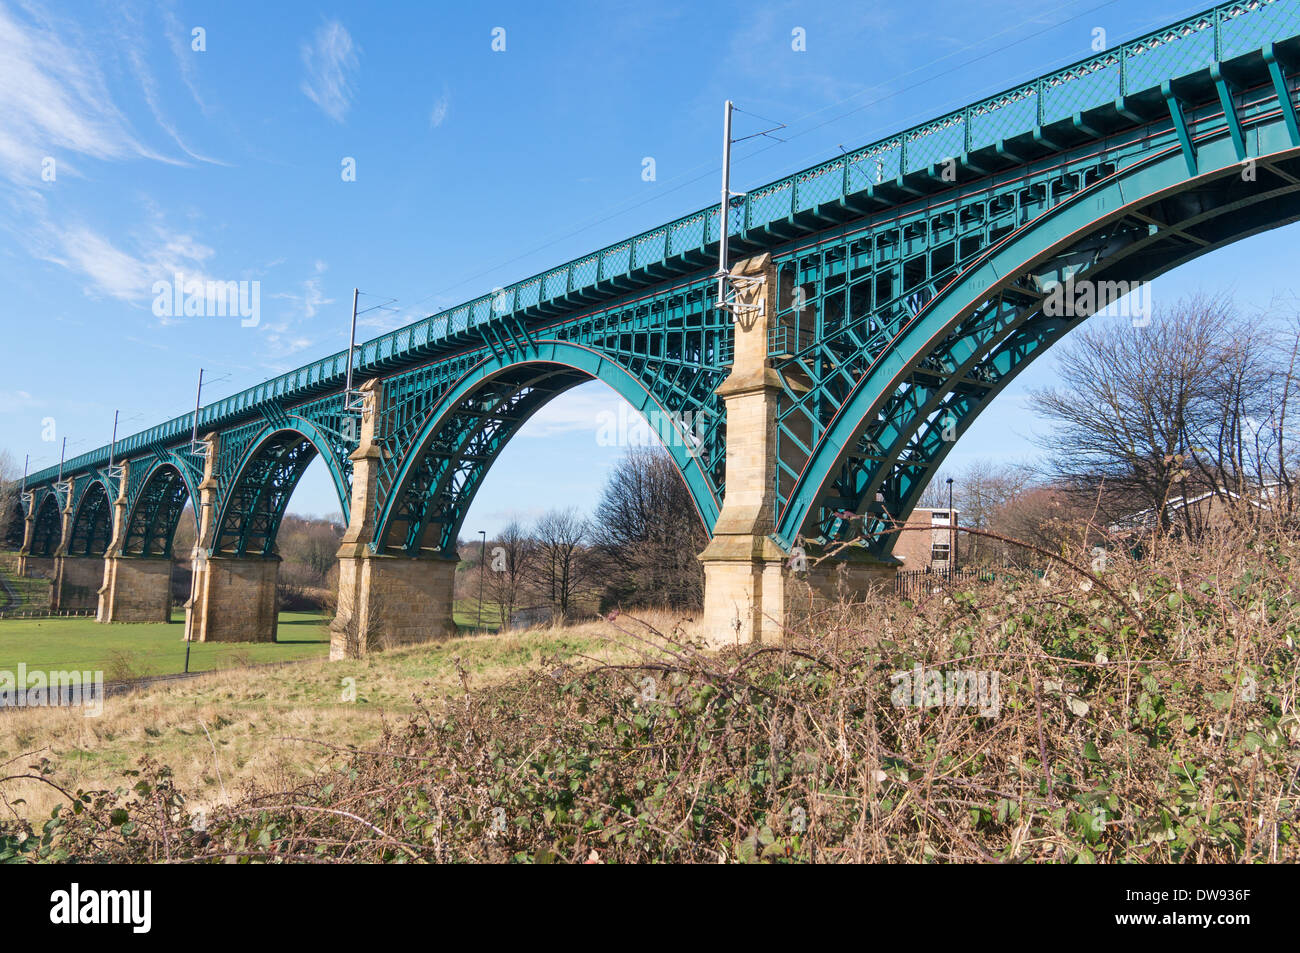 Willington Dene Victorian iron railway bridge or viaduct as used by the Tyne and Wear Metro system, Newcastle north east England Stock Photo